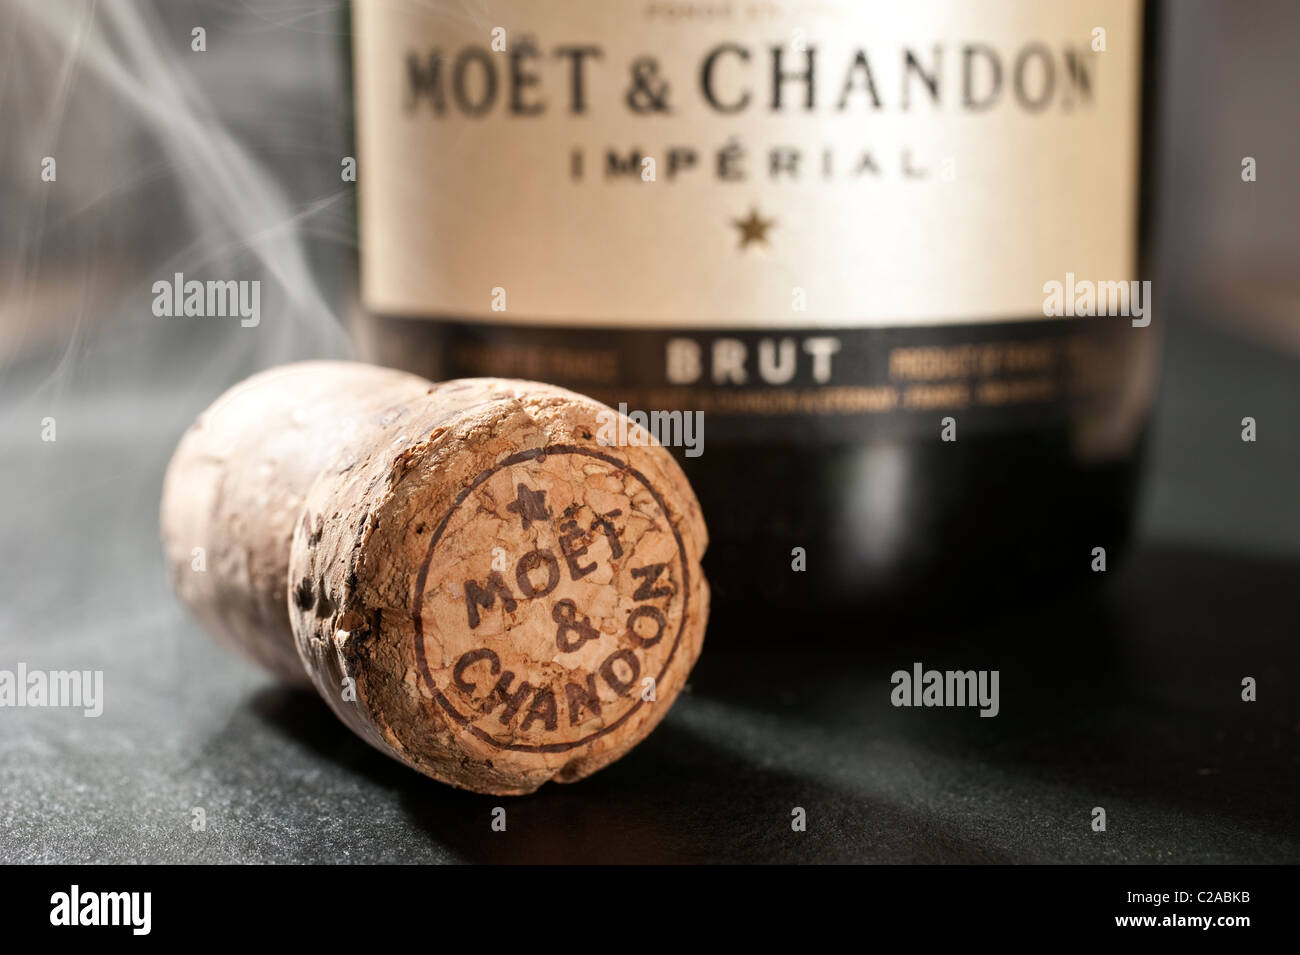 Moet Chandon Images – Browse 725 Stock Photos, Vectors, and Video